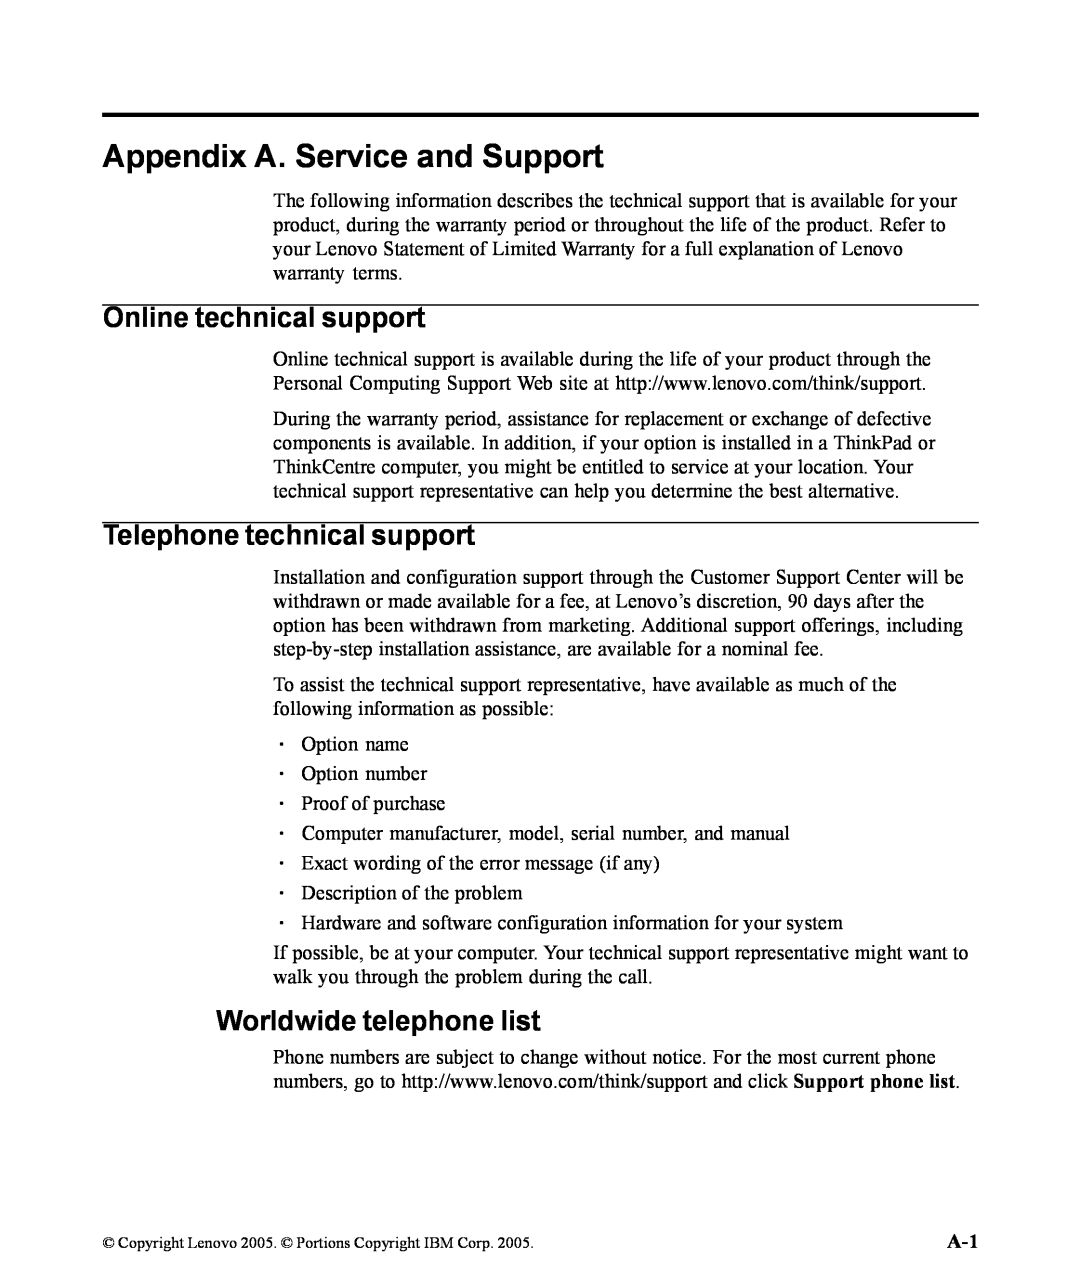 Lenovo 9205-HG2 manual Appendix A. Service and Support, Online technical support, Telephone technical support 